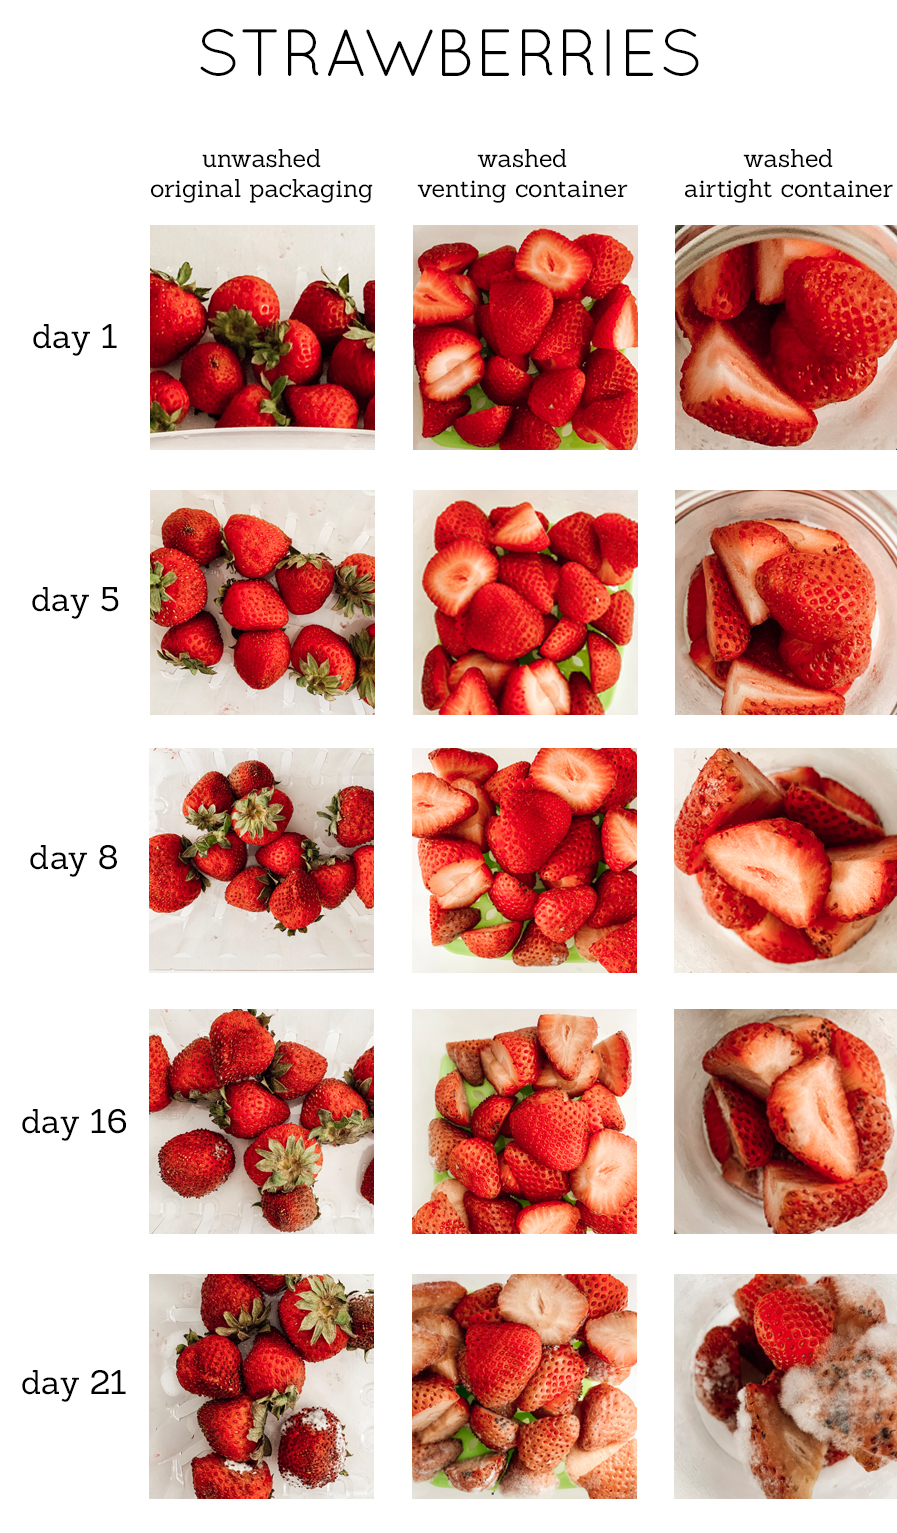 How To Keep Strawberries Clean?